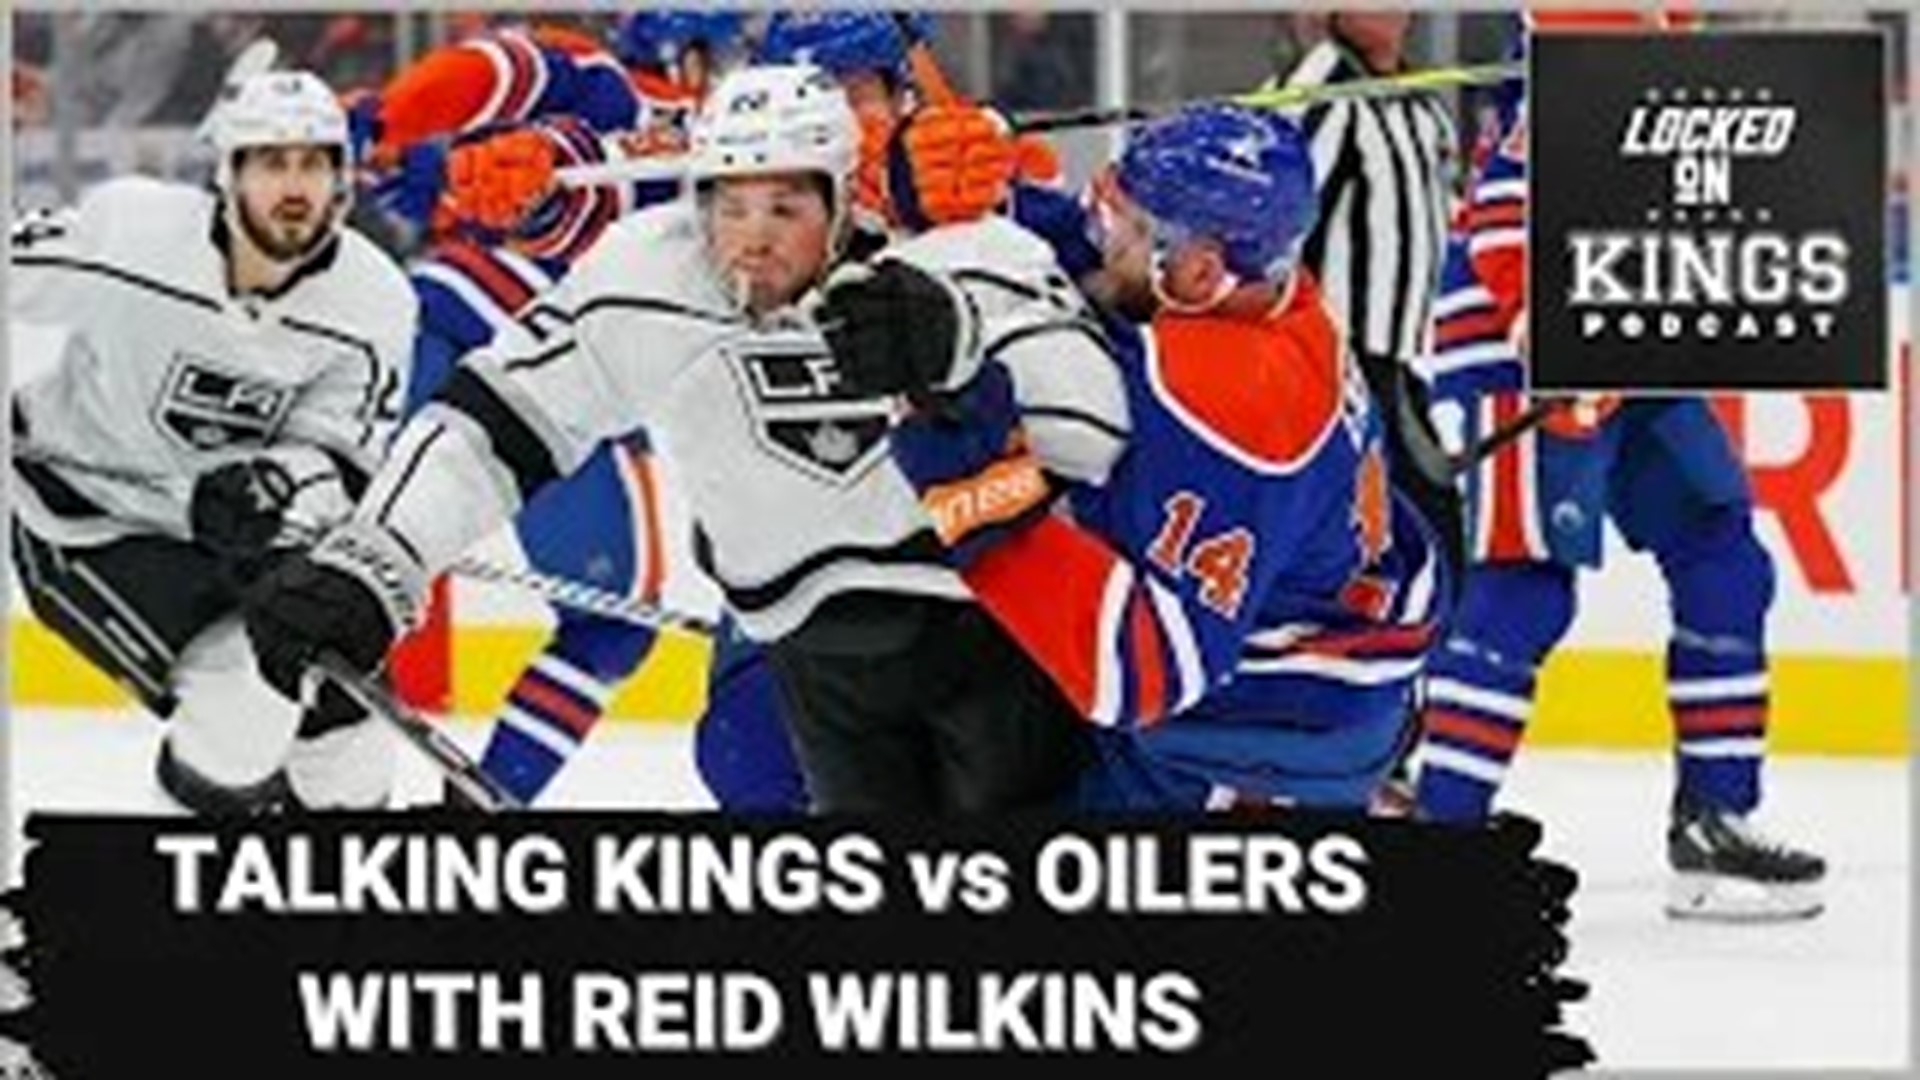 We preview tonight’s big Kings/Oilers game (scouting report, possible playoff preview) with the help of Reid Wilkins from the Oilers Radio Network on this LOK.